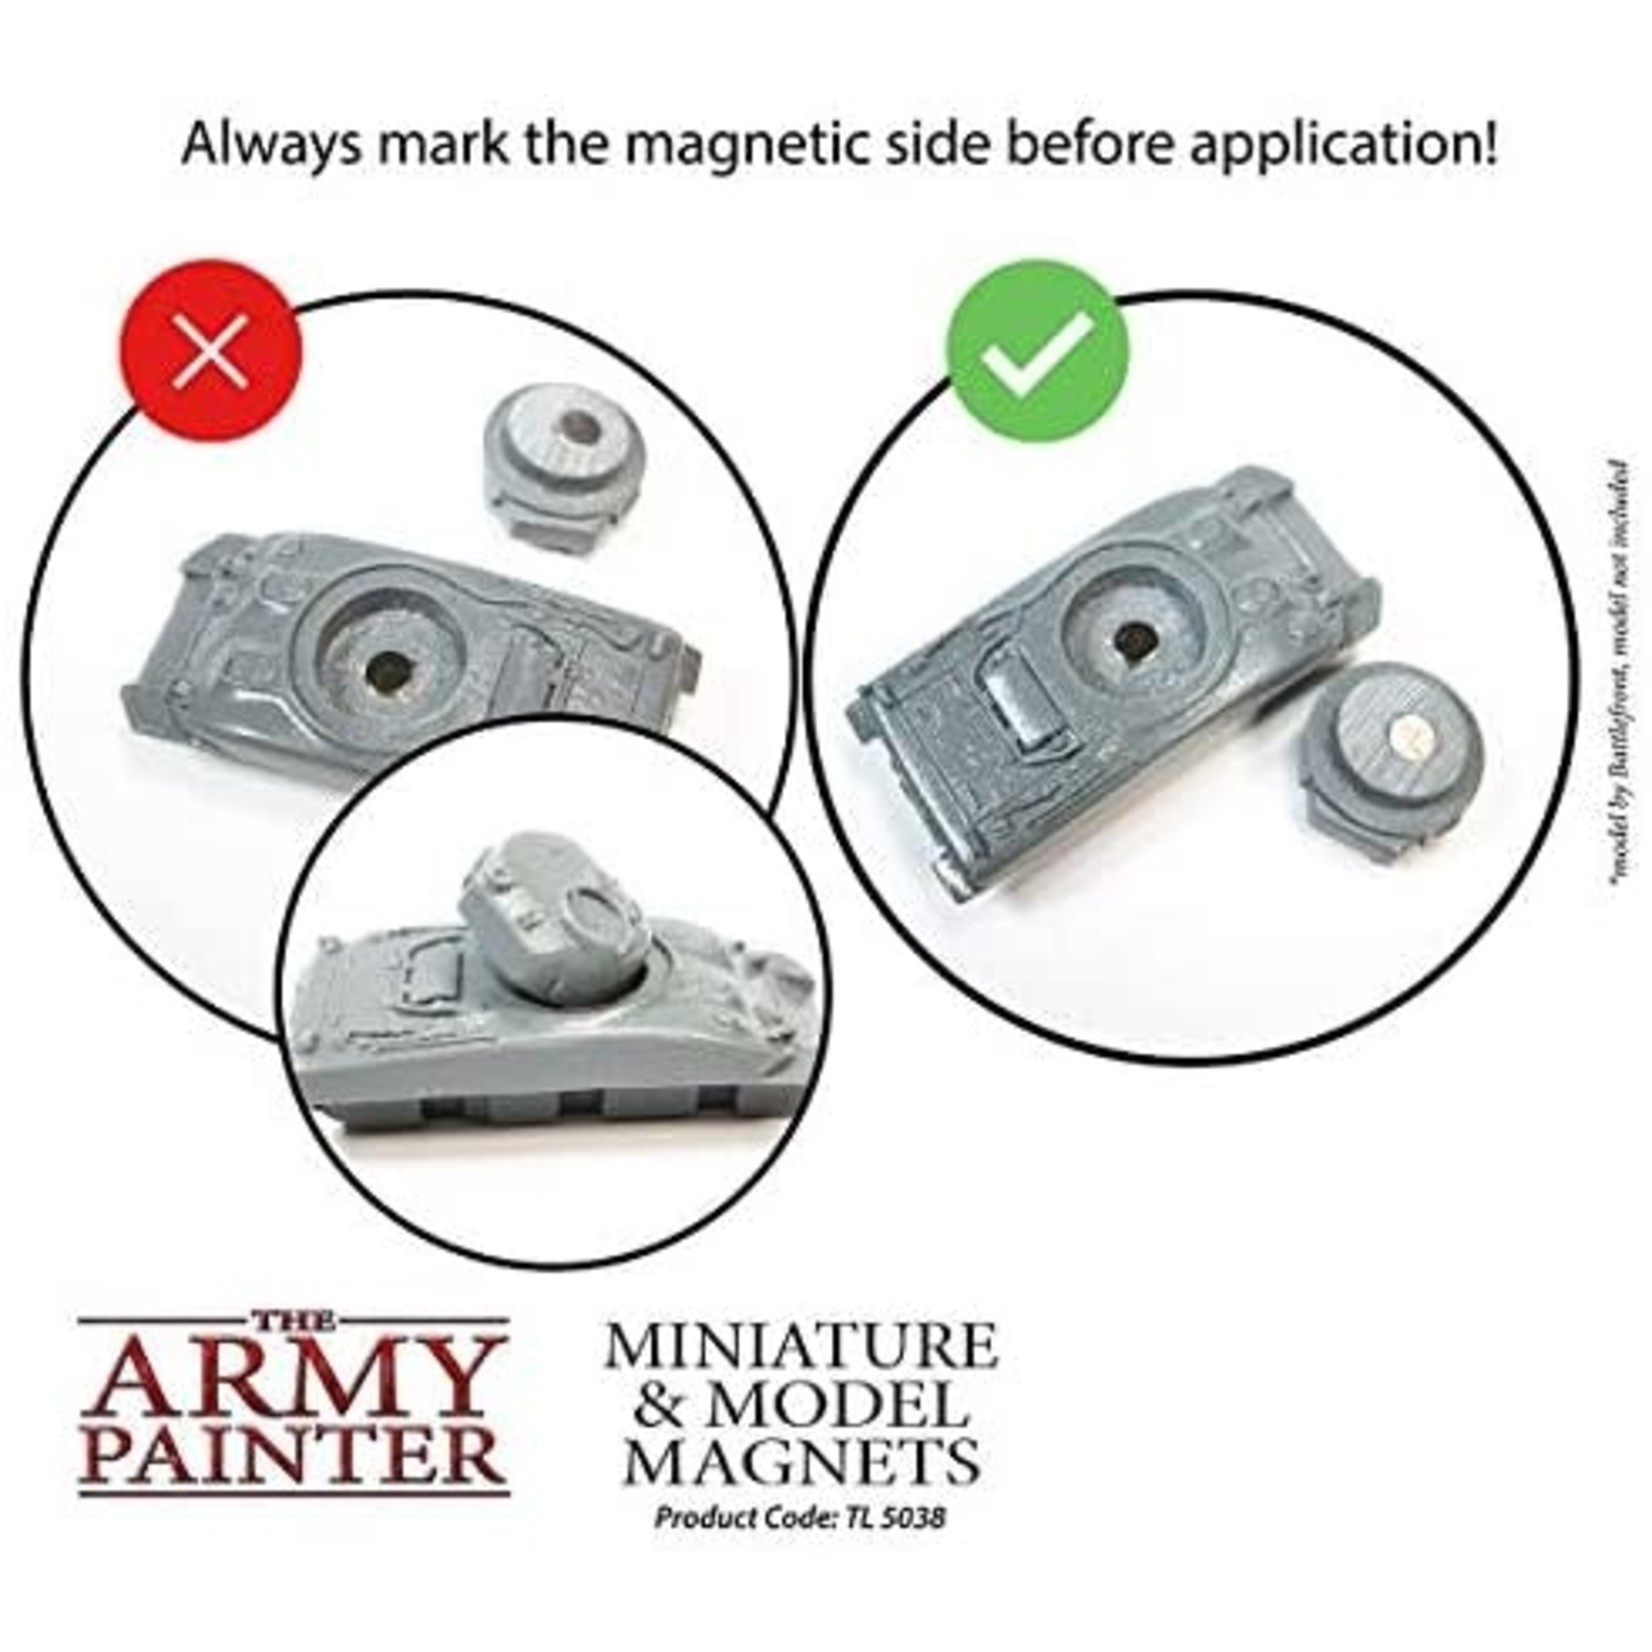 THE ARMY PAINTER MINIATURE AND MODEL MAGNETS